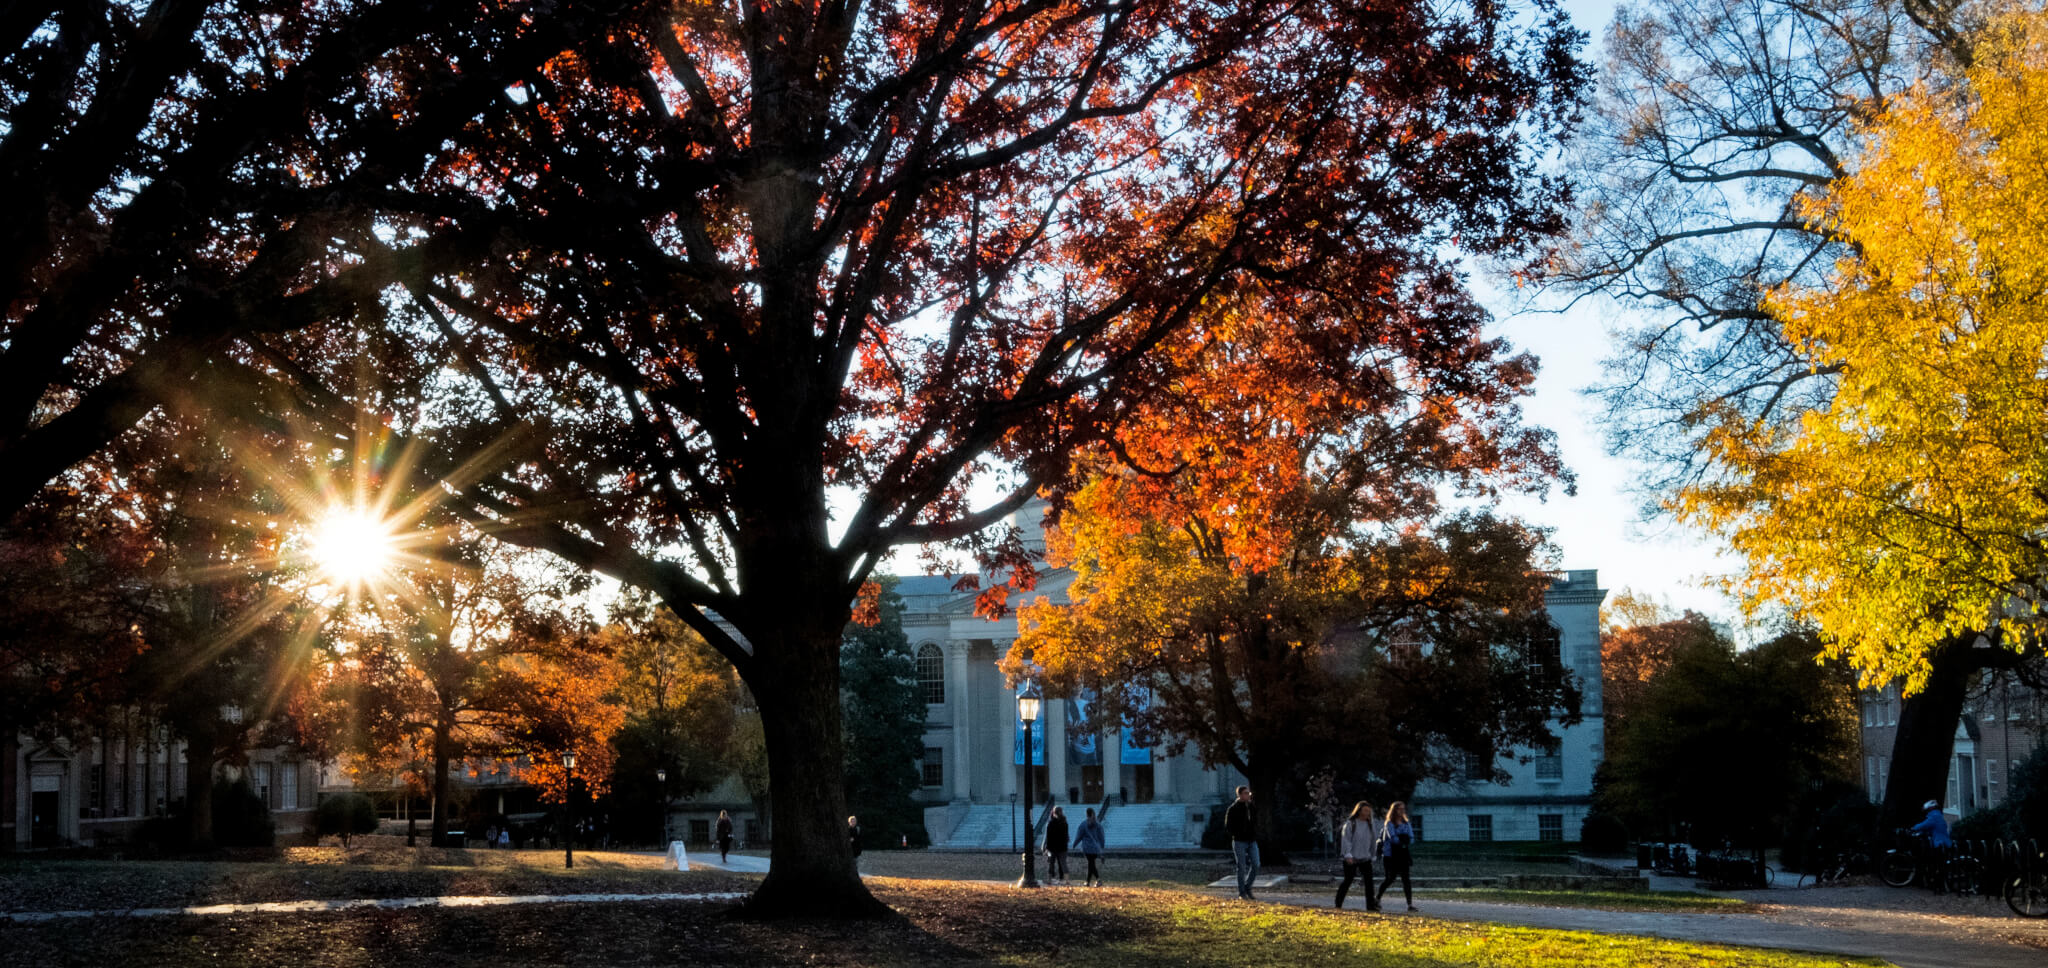 UNC-Chapel Hill campus in the fall.